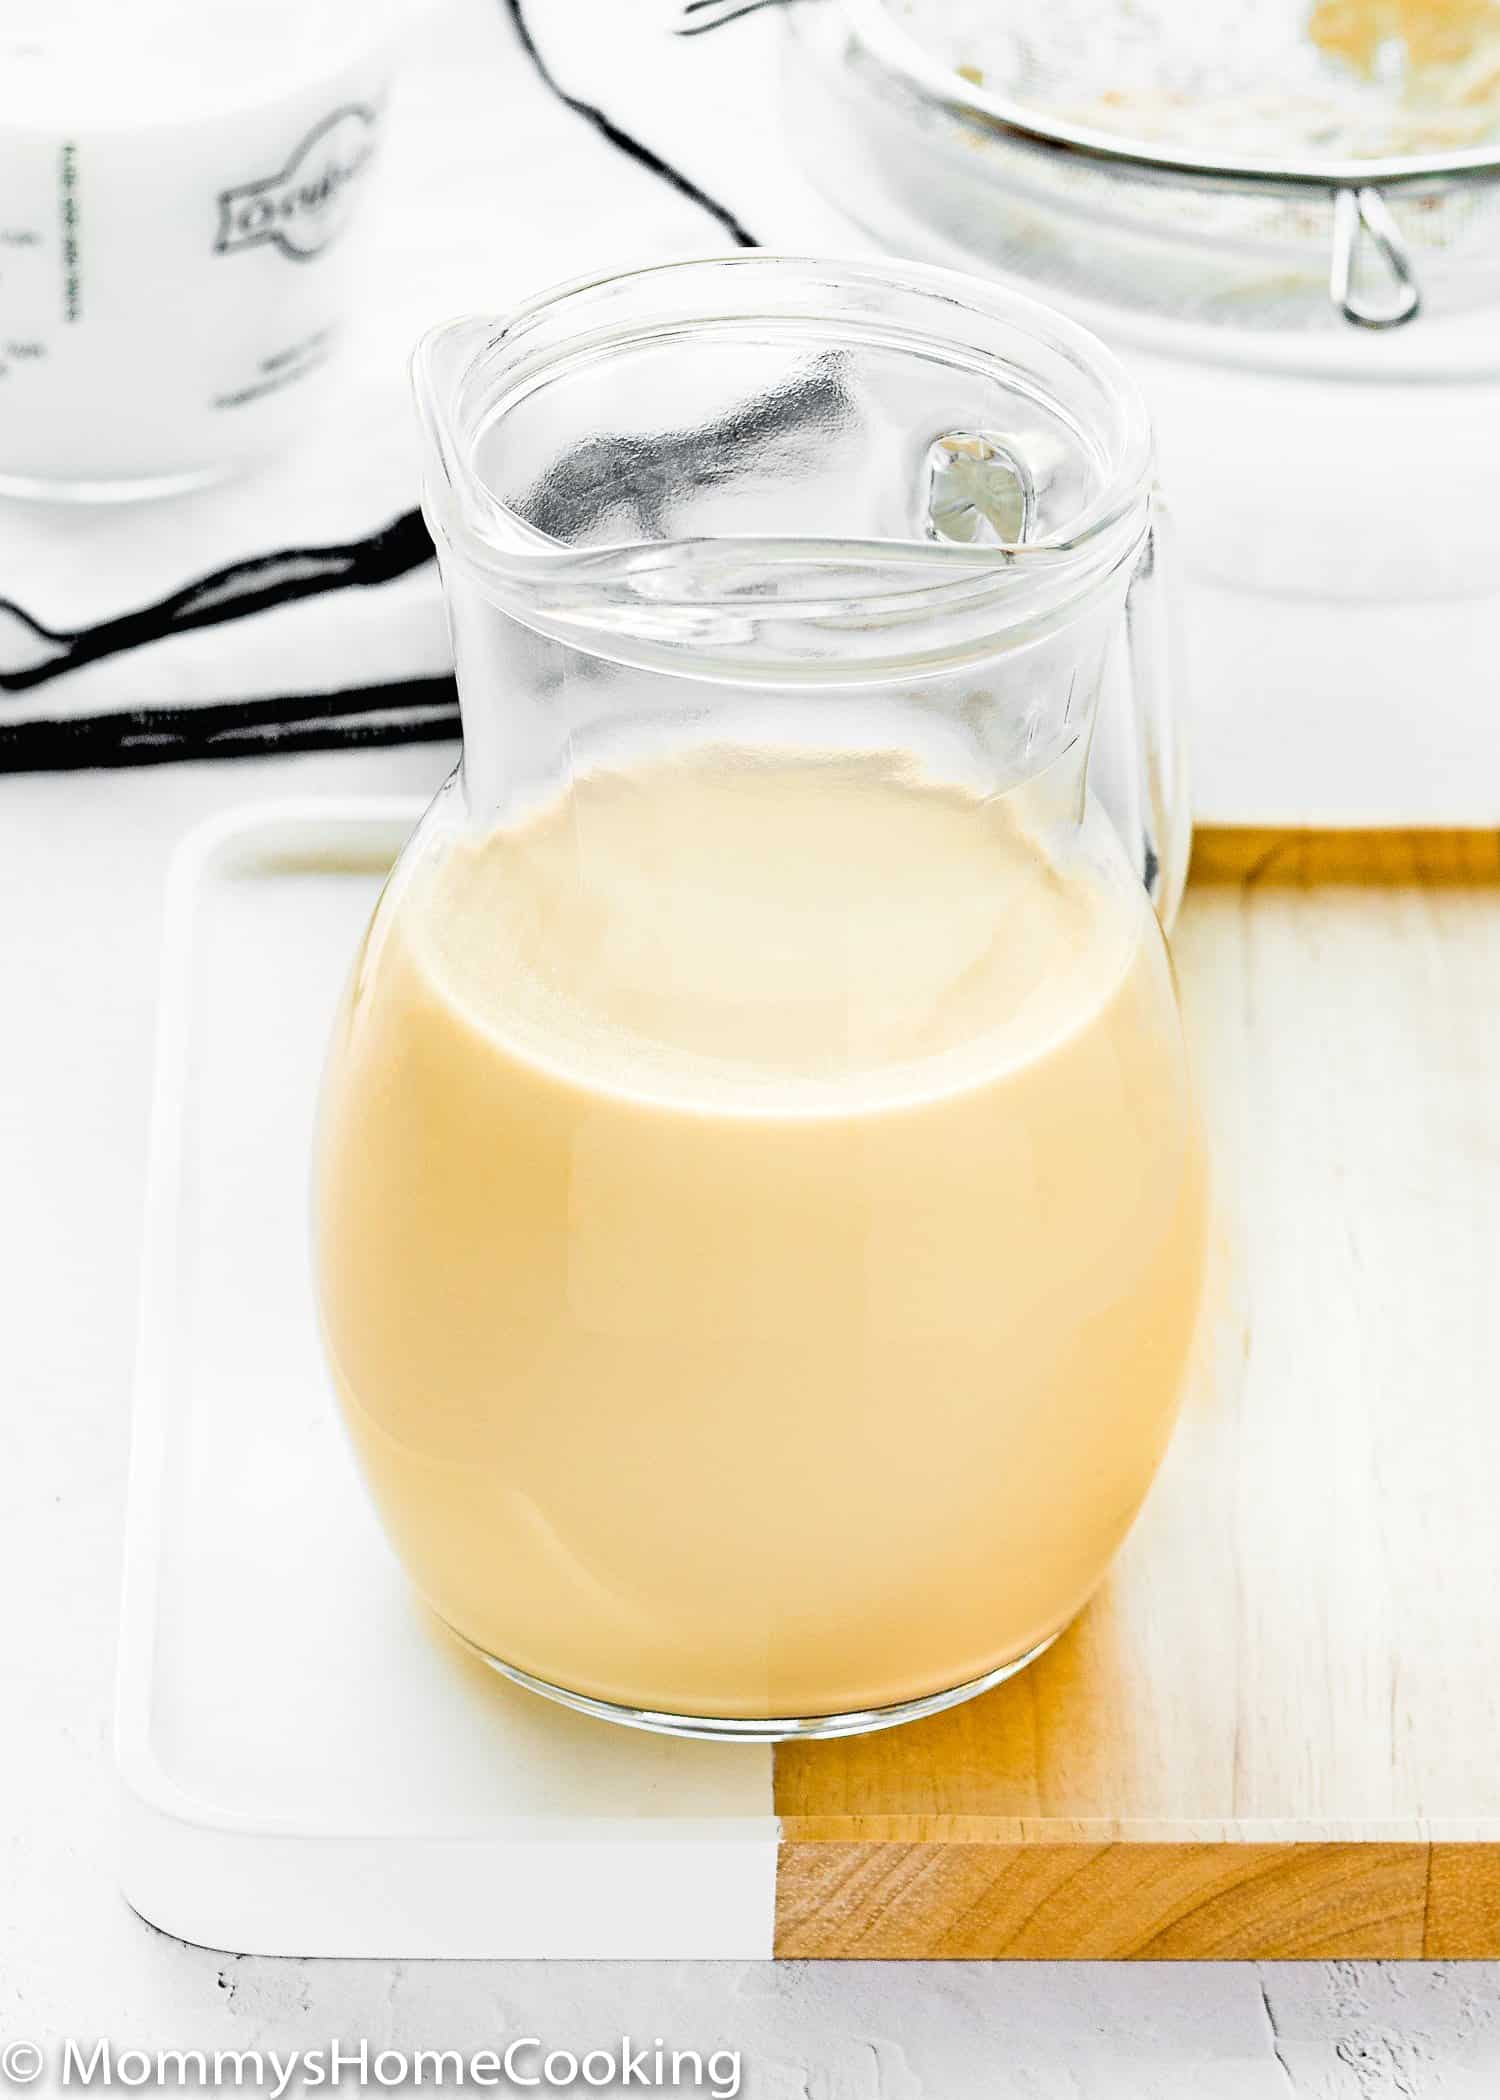 Homemade evaporated milk in a jar.